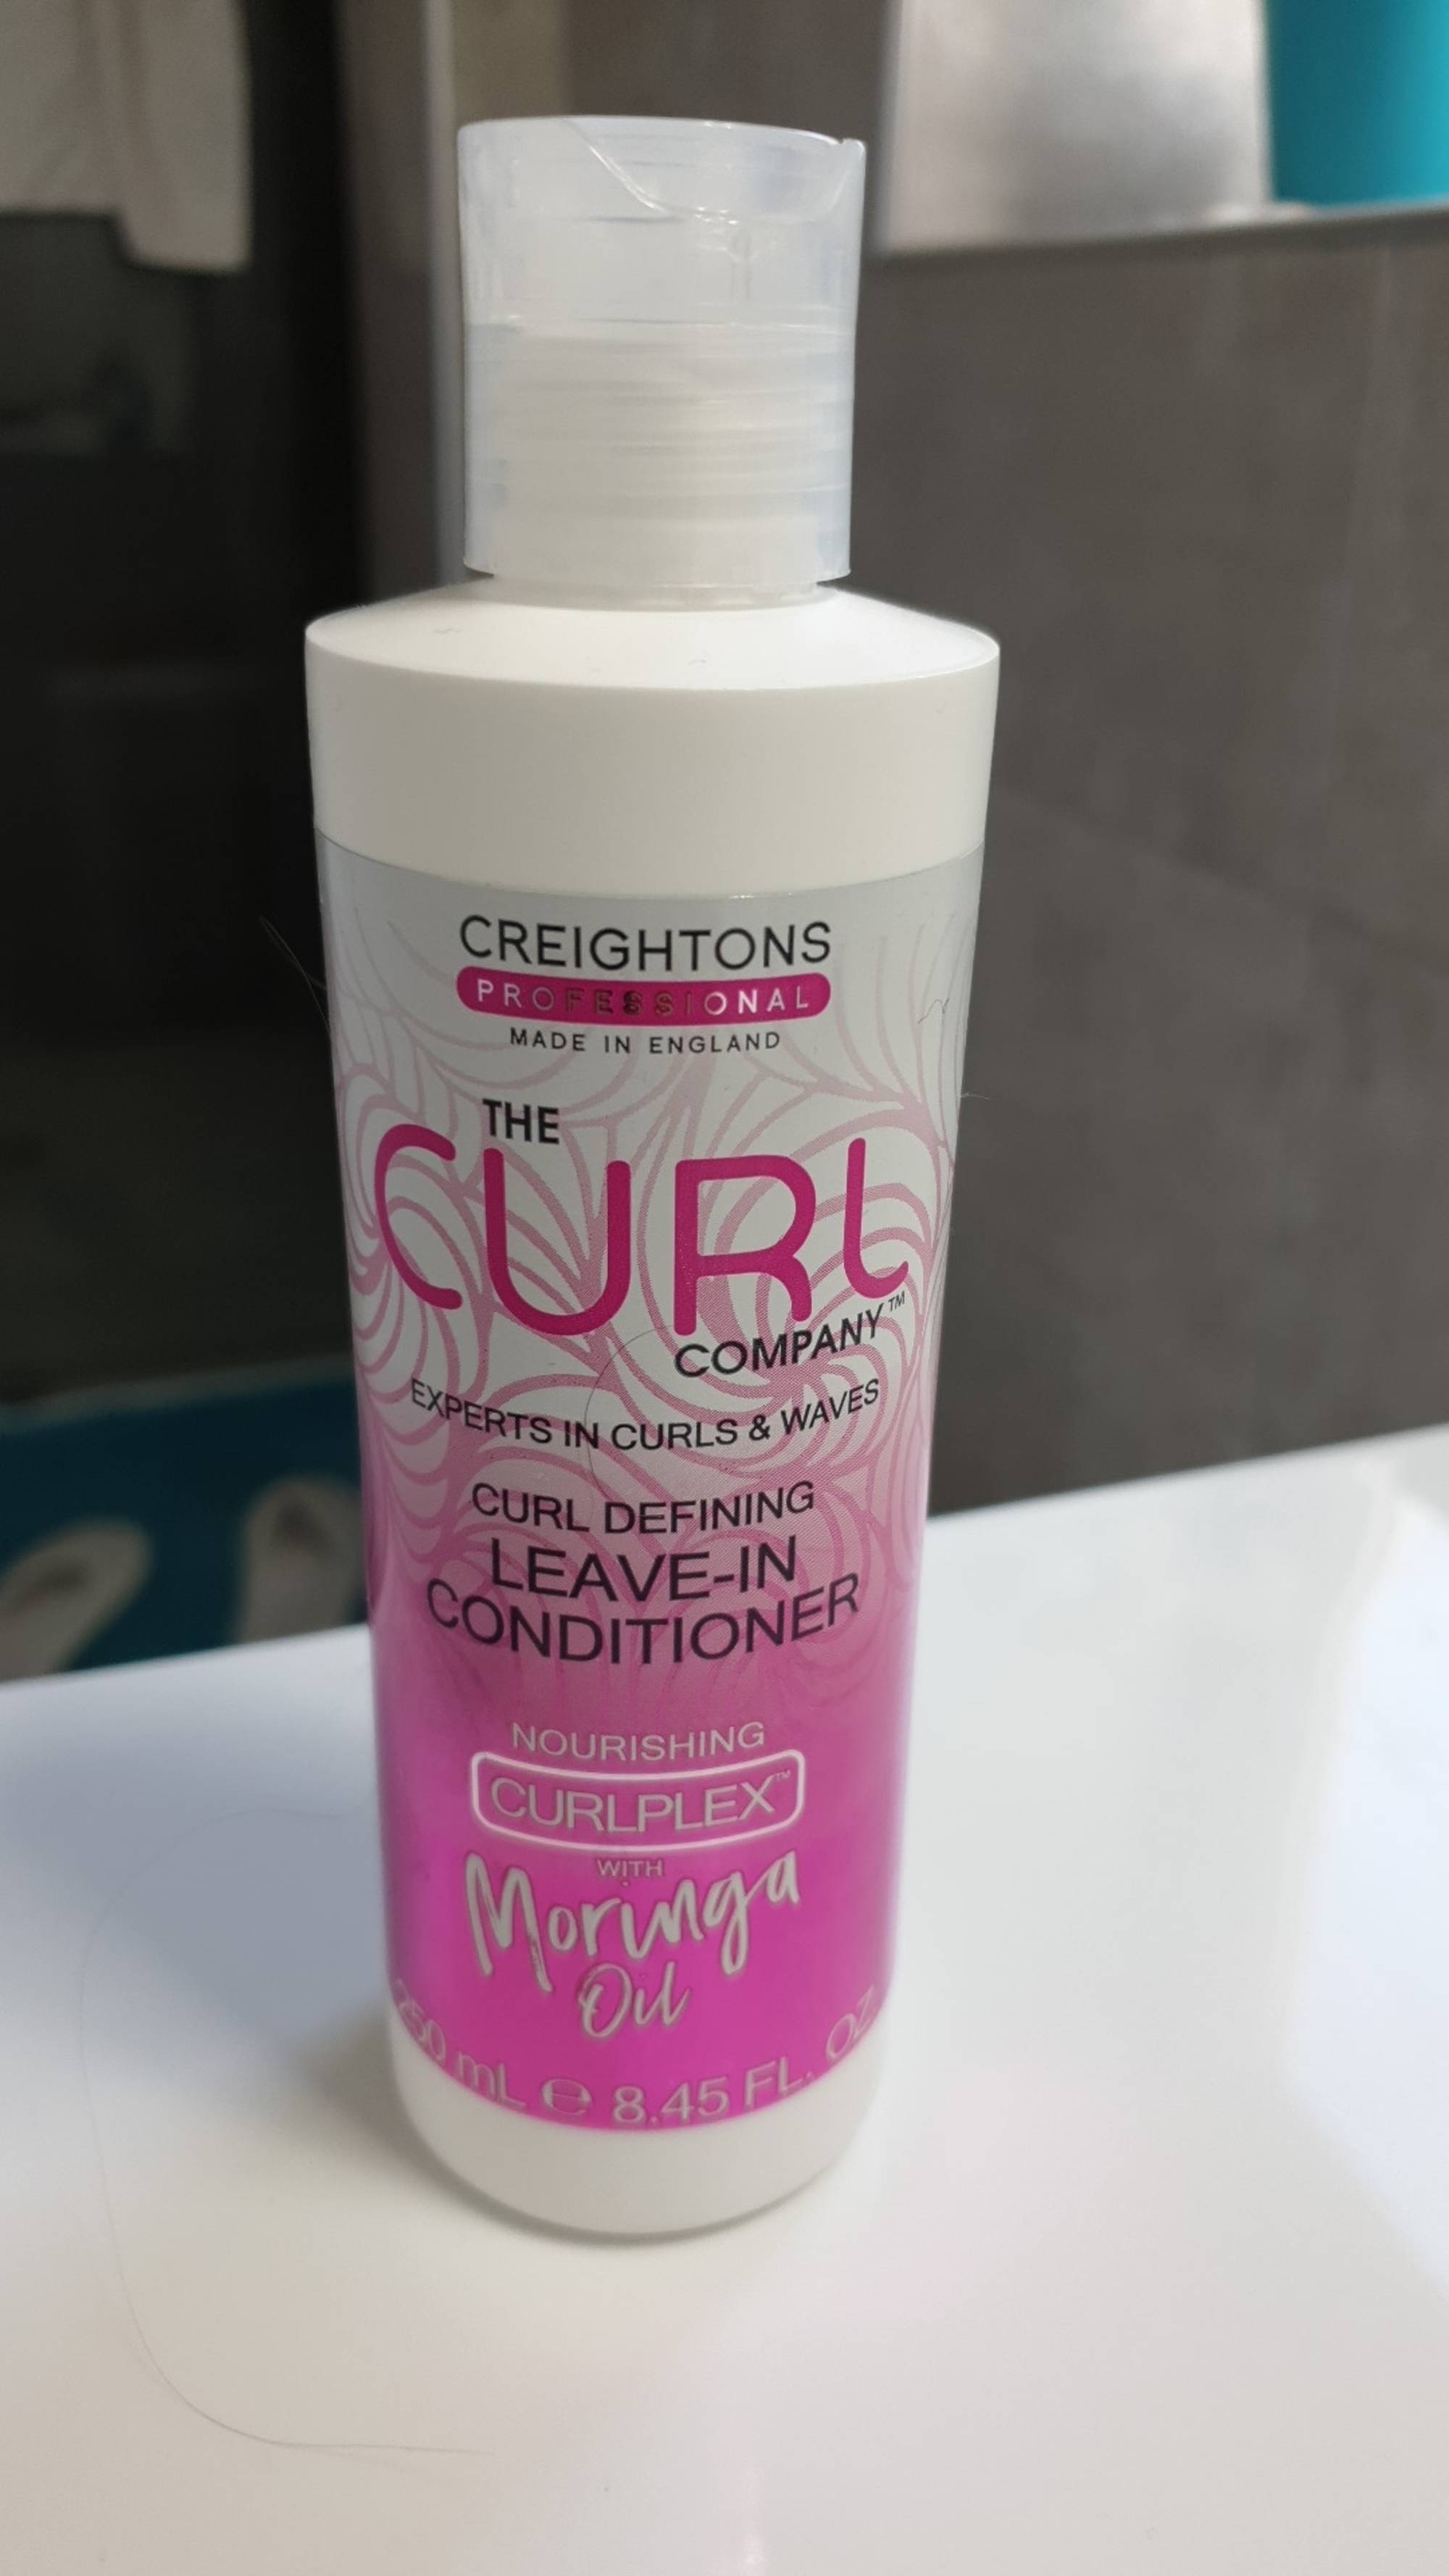 CREIGHTONS - The curl company - Curl defining